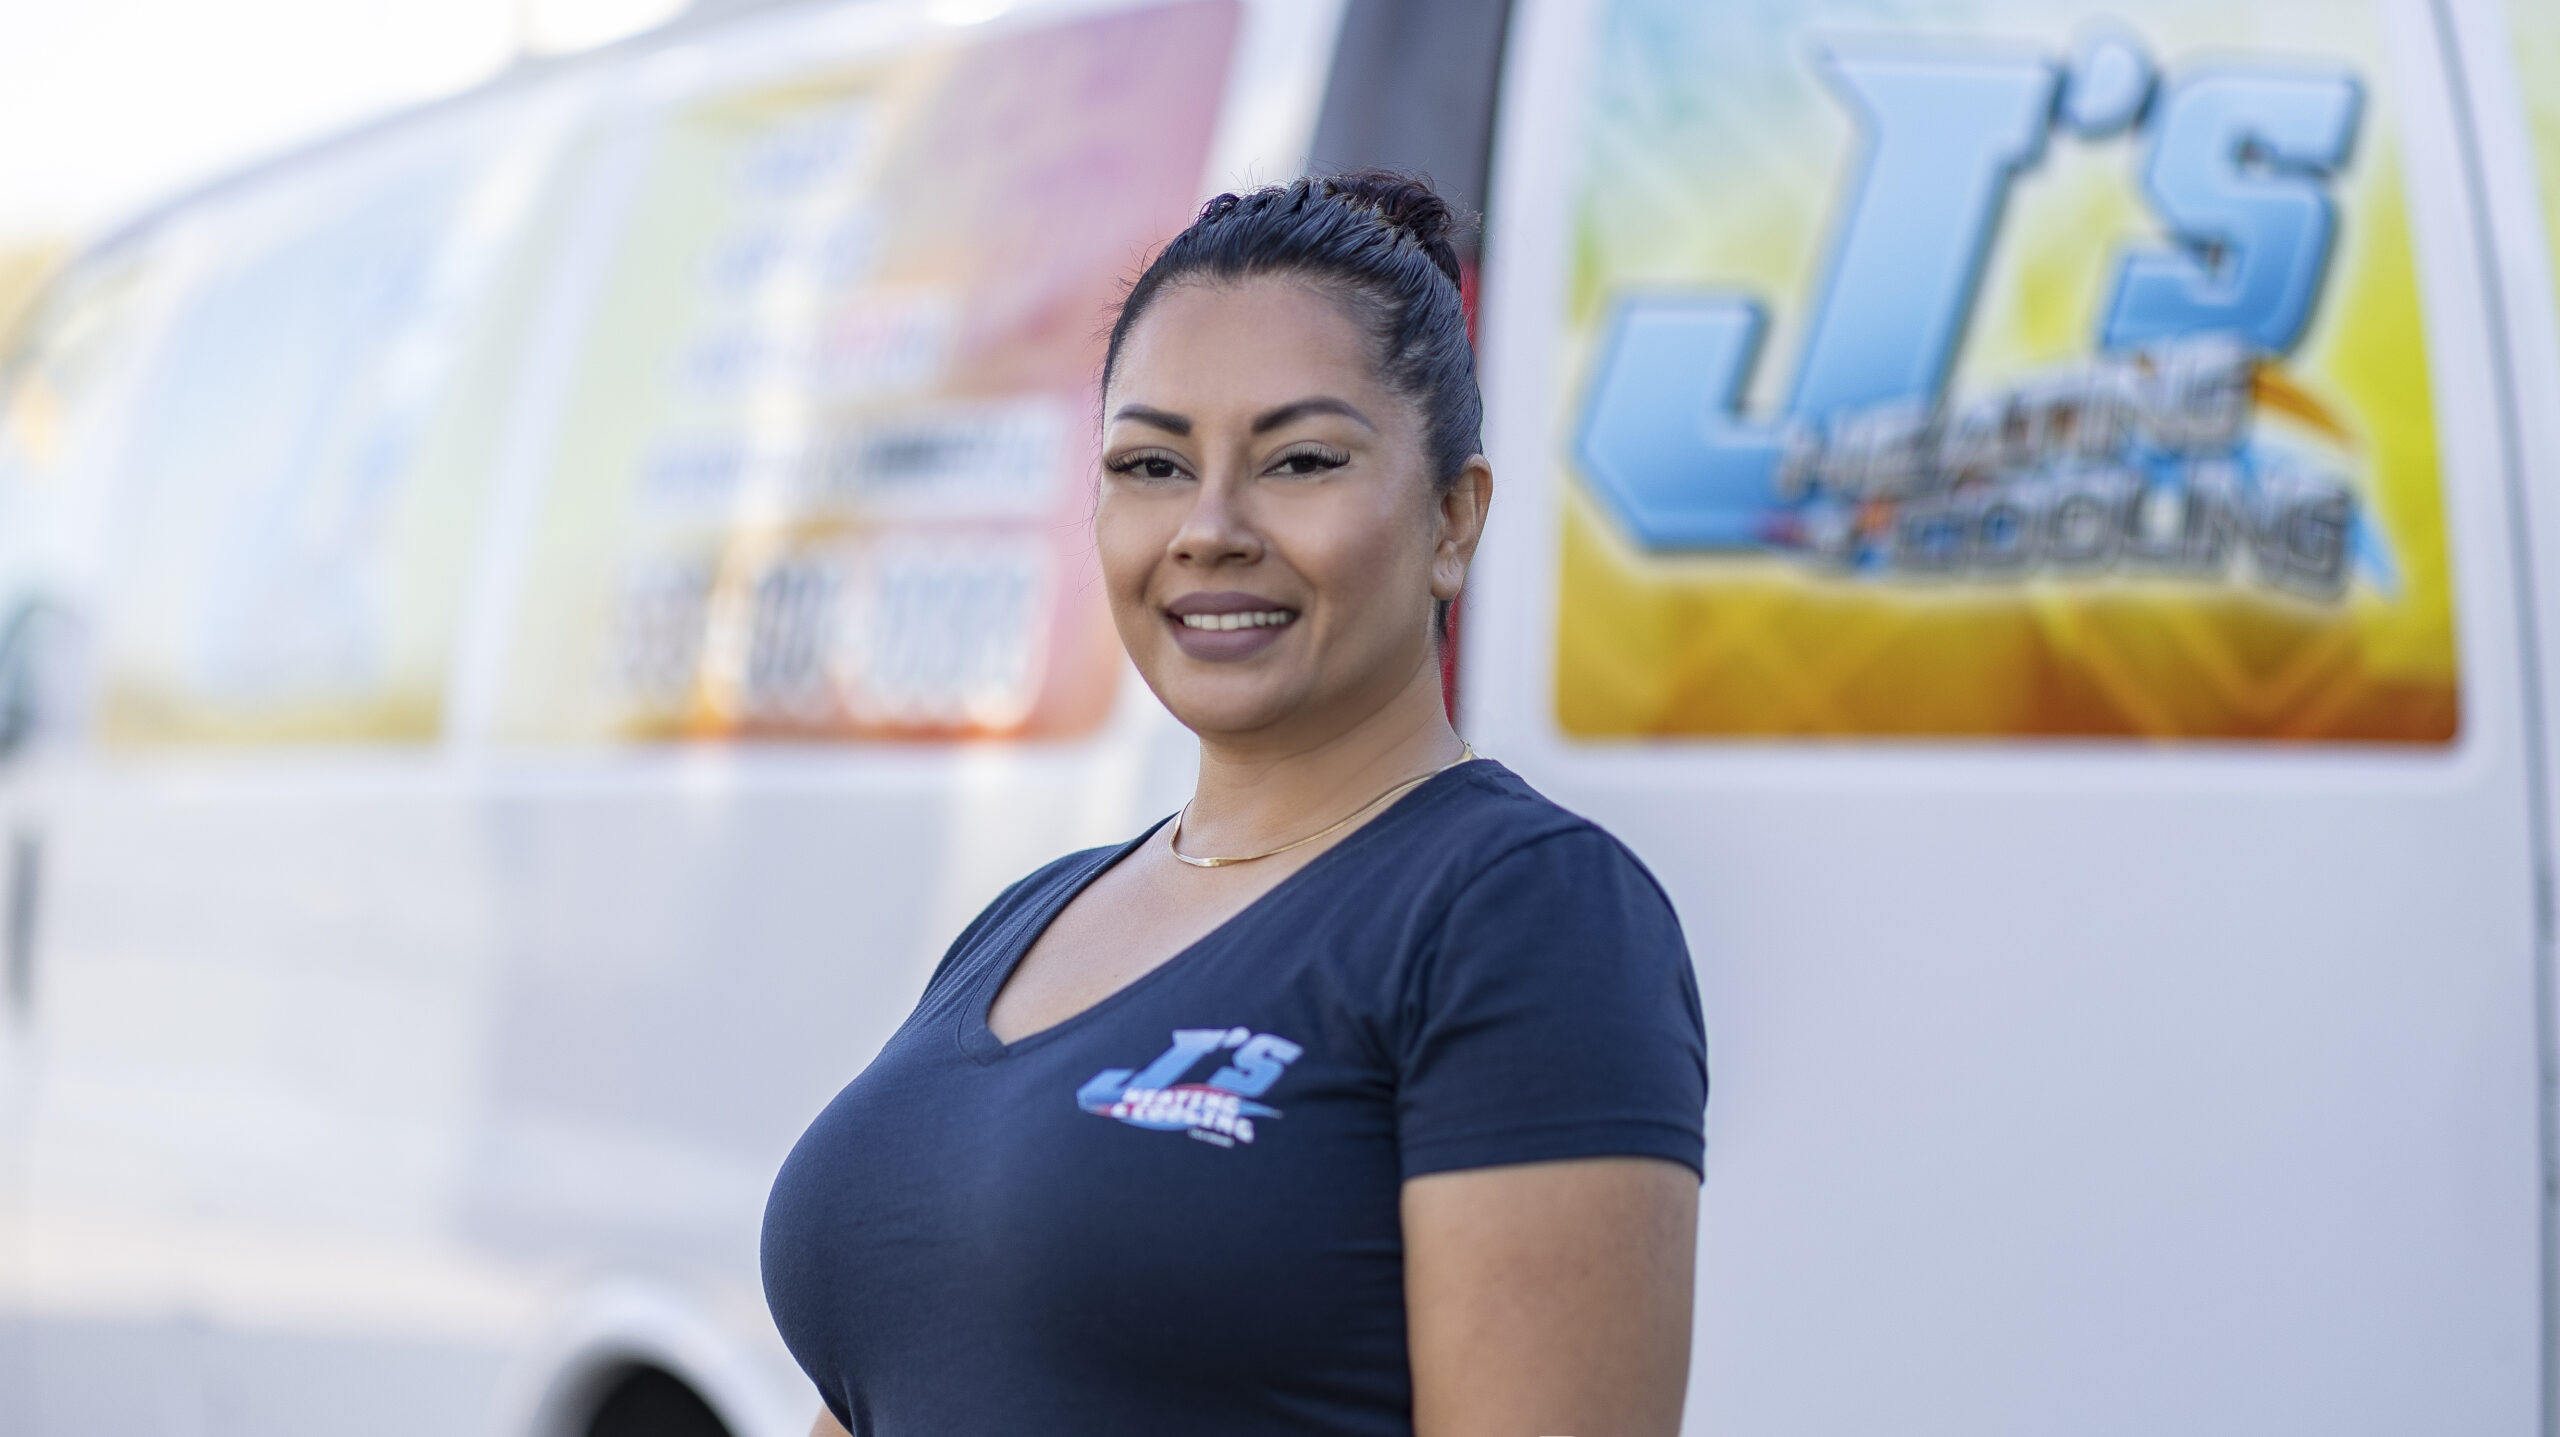 J's Heating and Cooling Adella Caudillo Van profile picture.